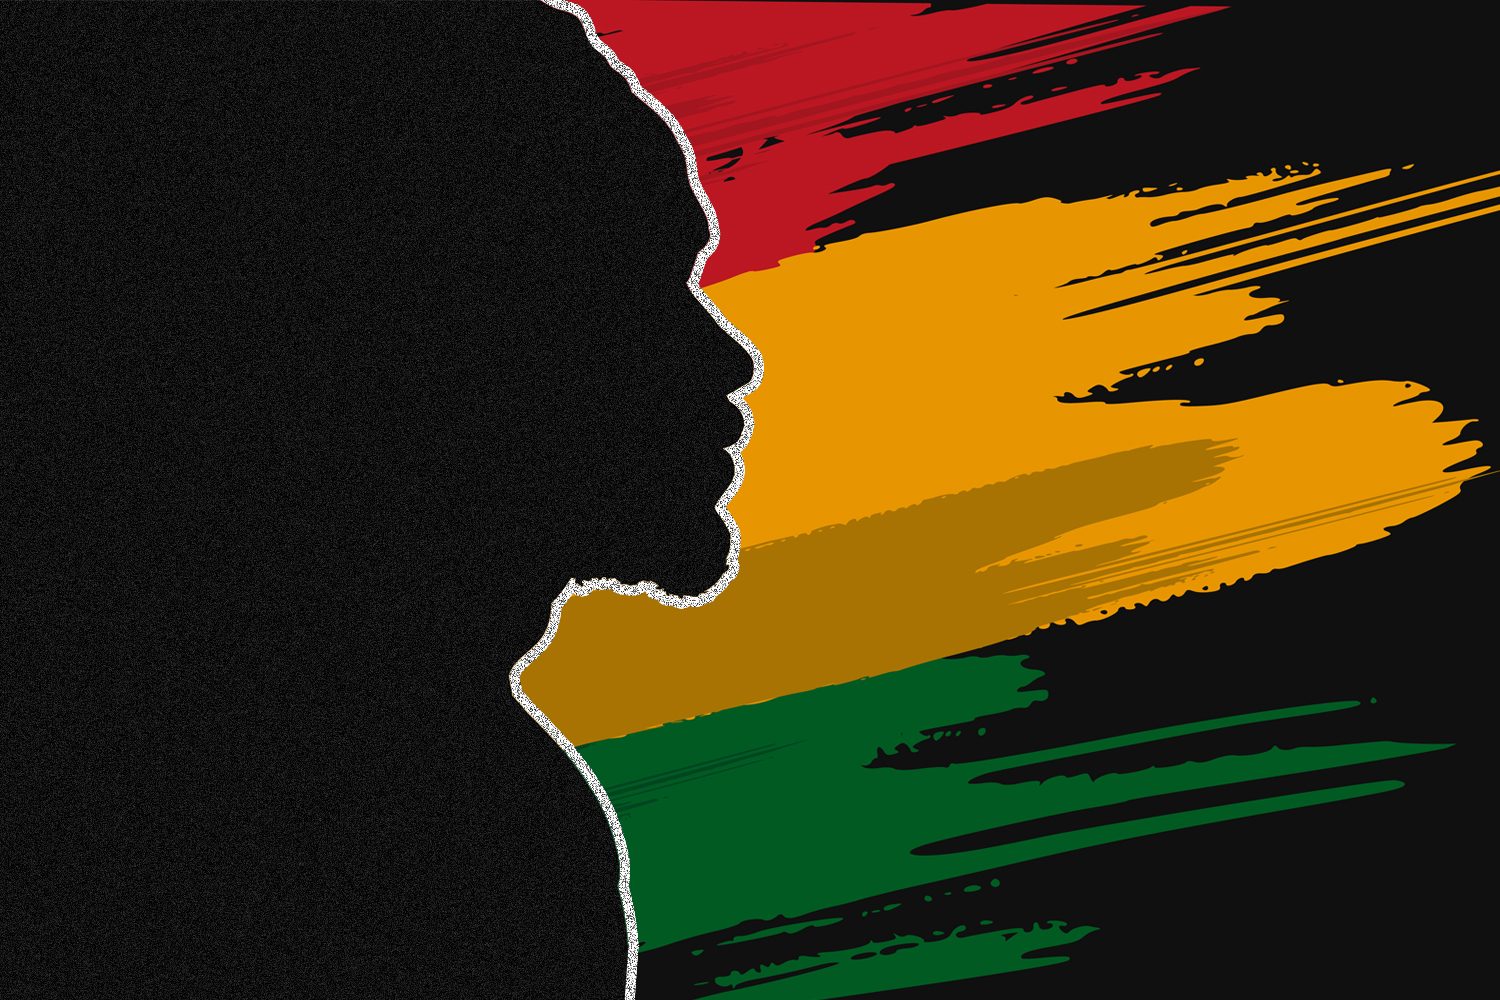 The silhouette of a man with red, yellow, and green paint stripes in the background